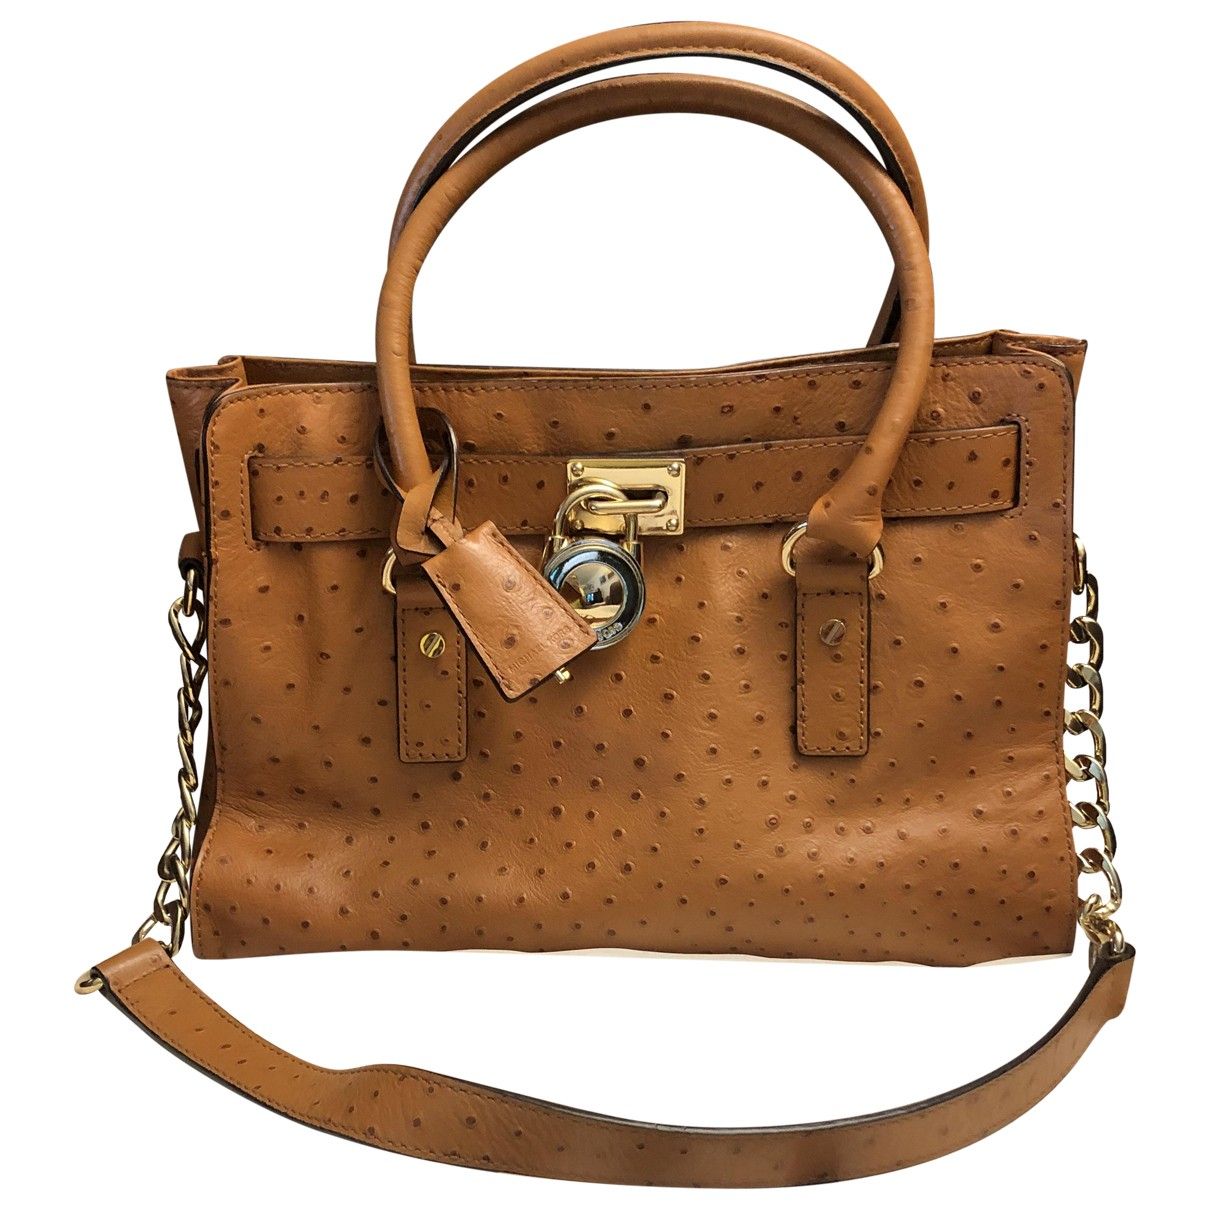 Hamilton leather bag Michael Kors Camel in Leather - 11523357